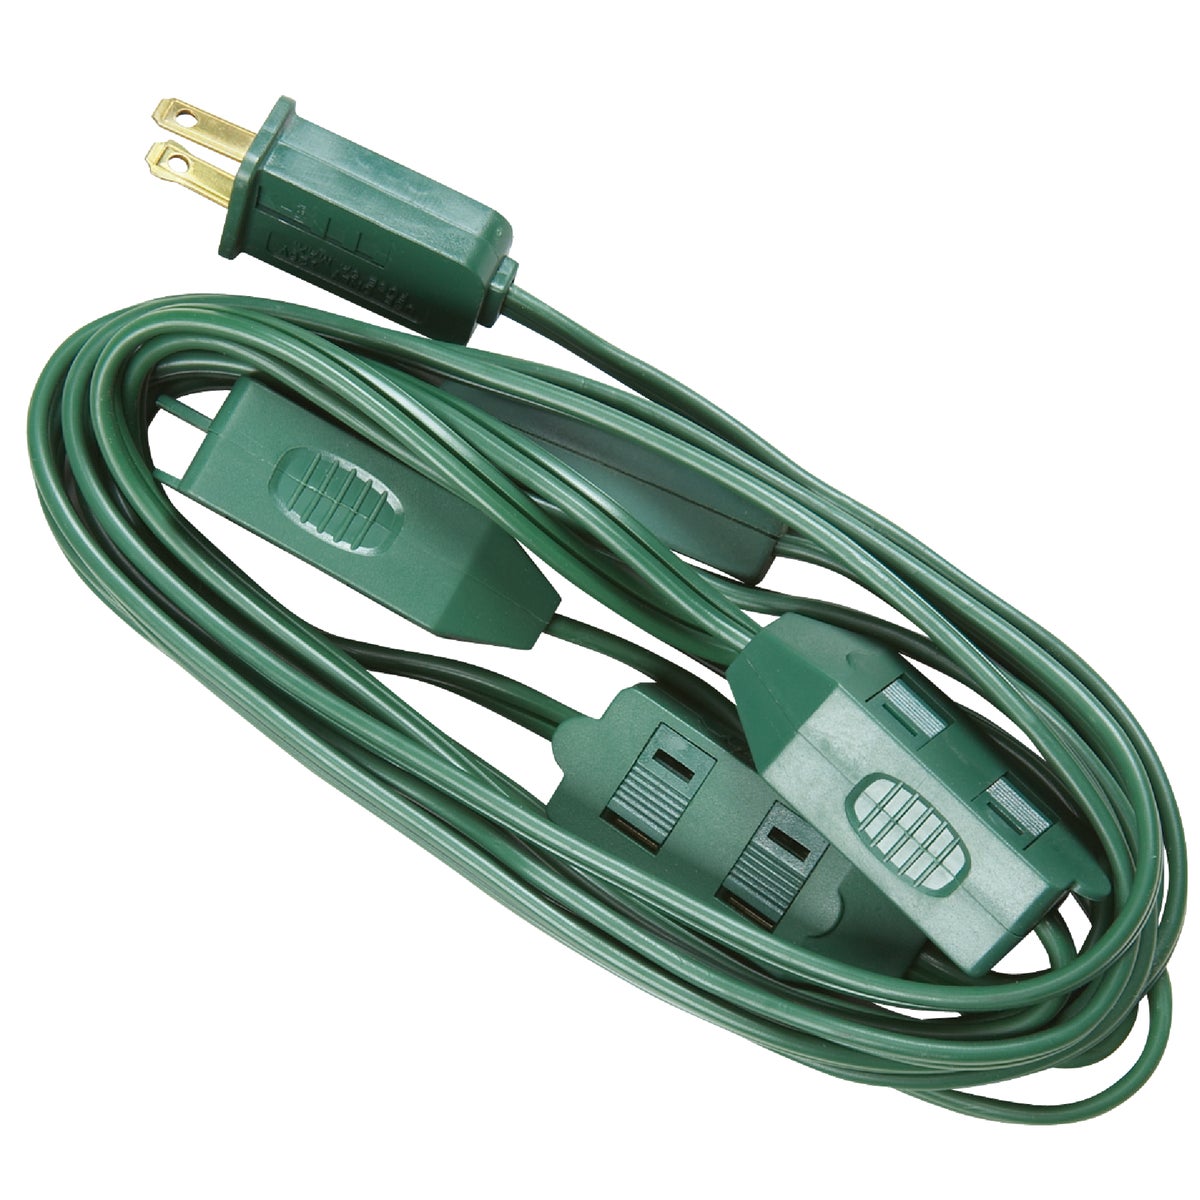 Item 549355, 18-gauge/2-conductor Christmas tree extension cord.